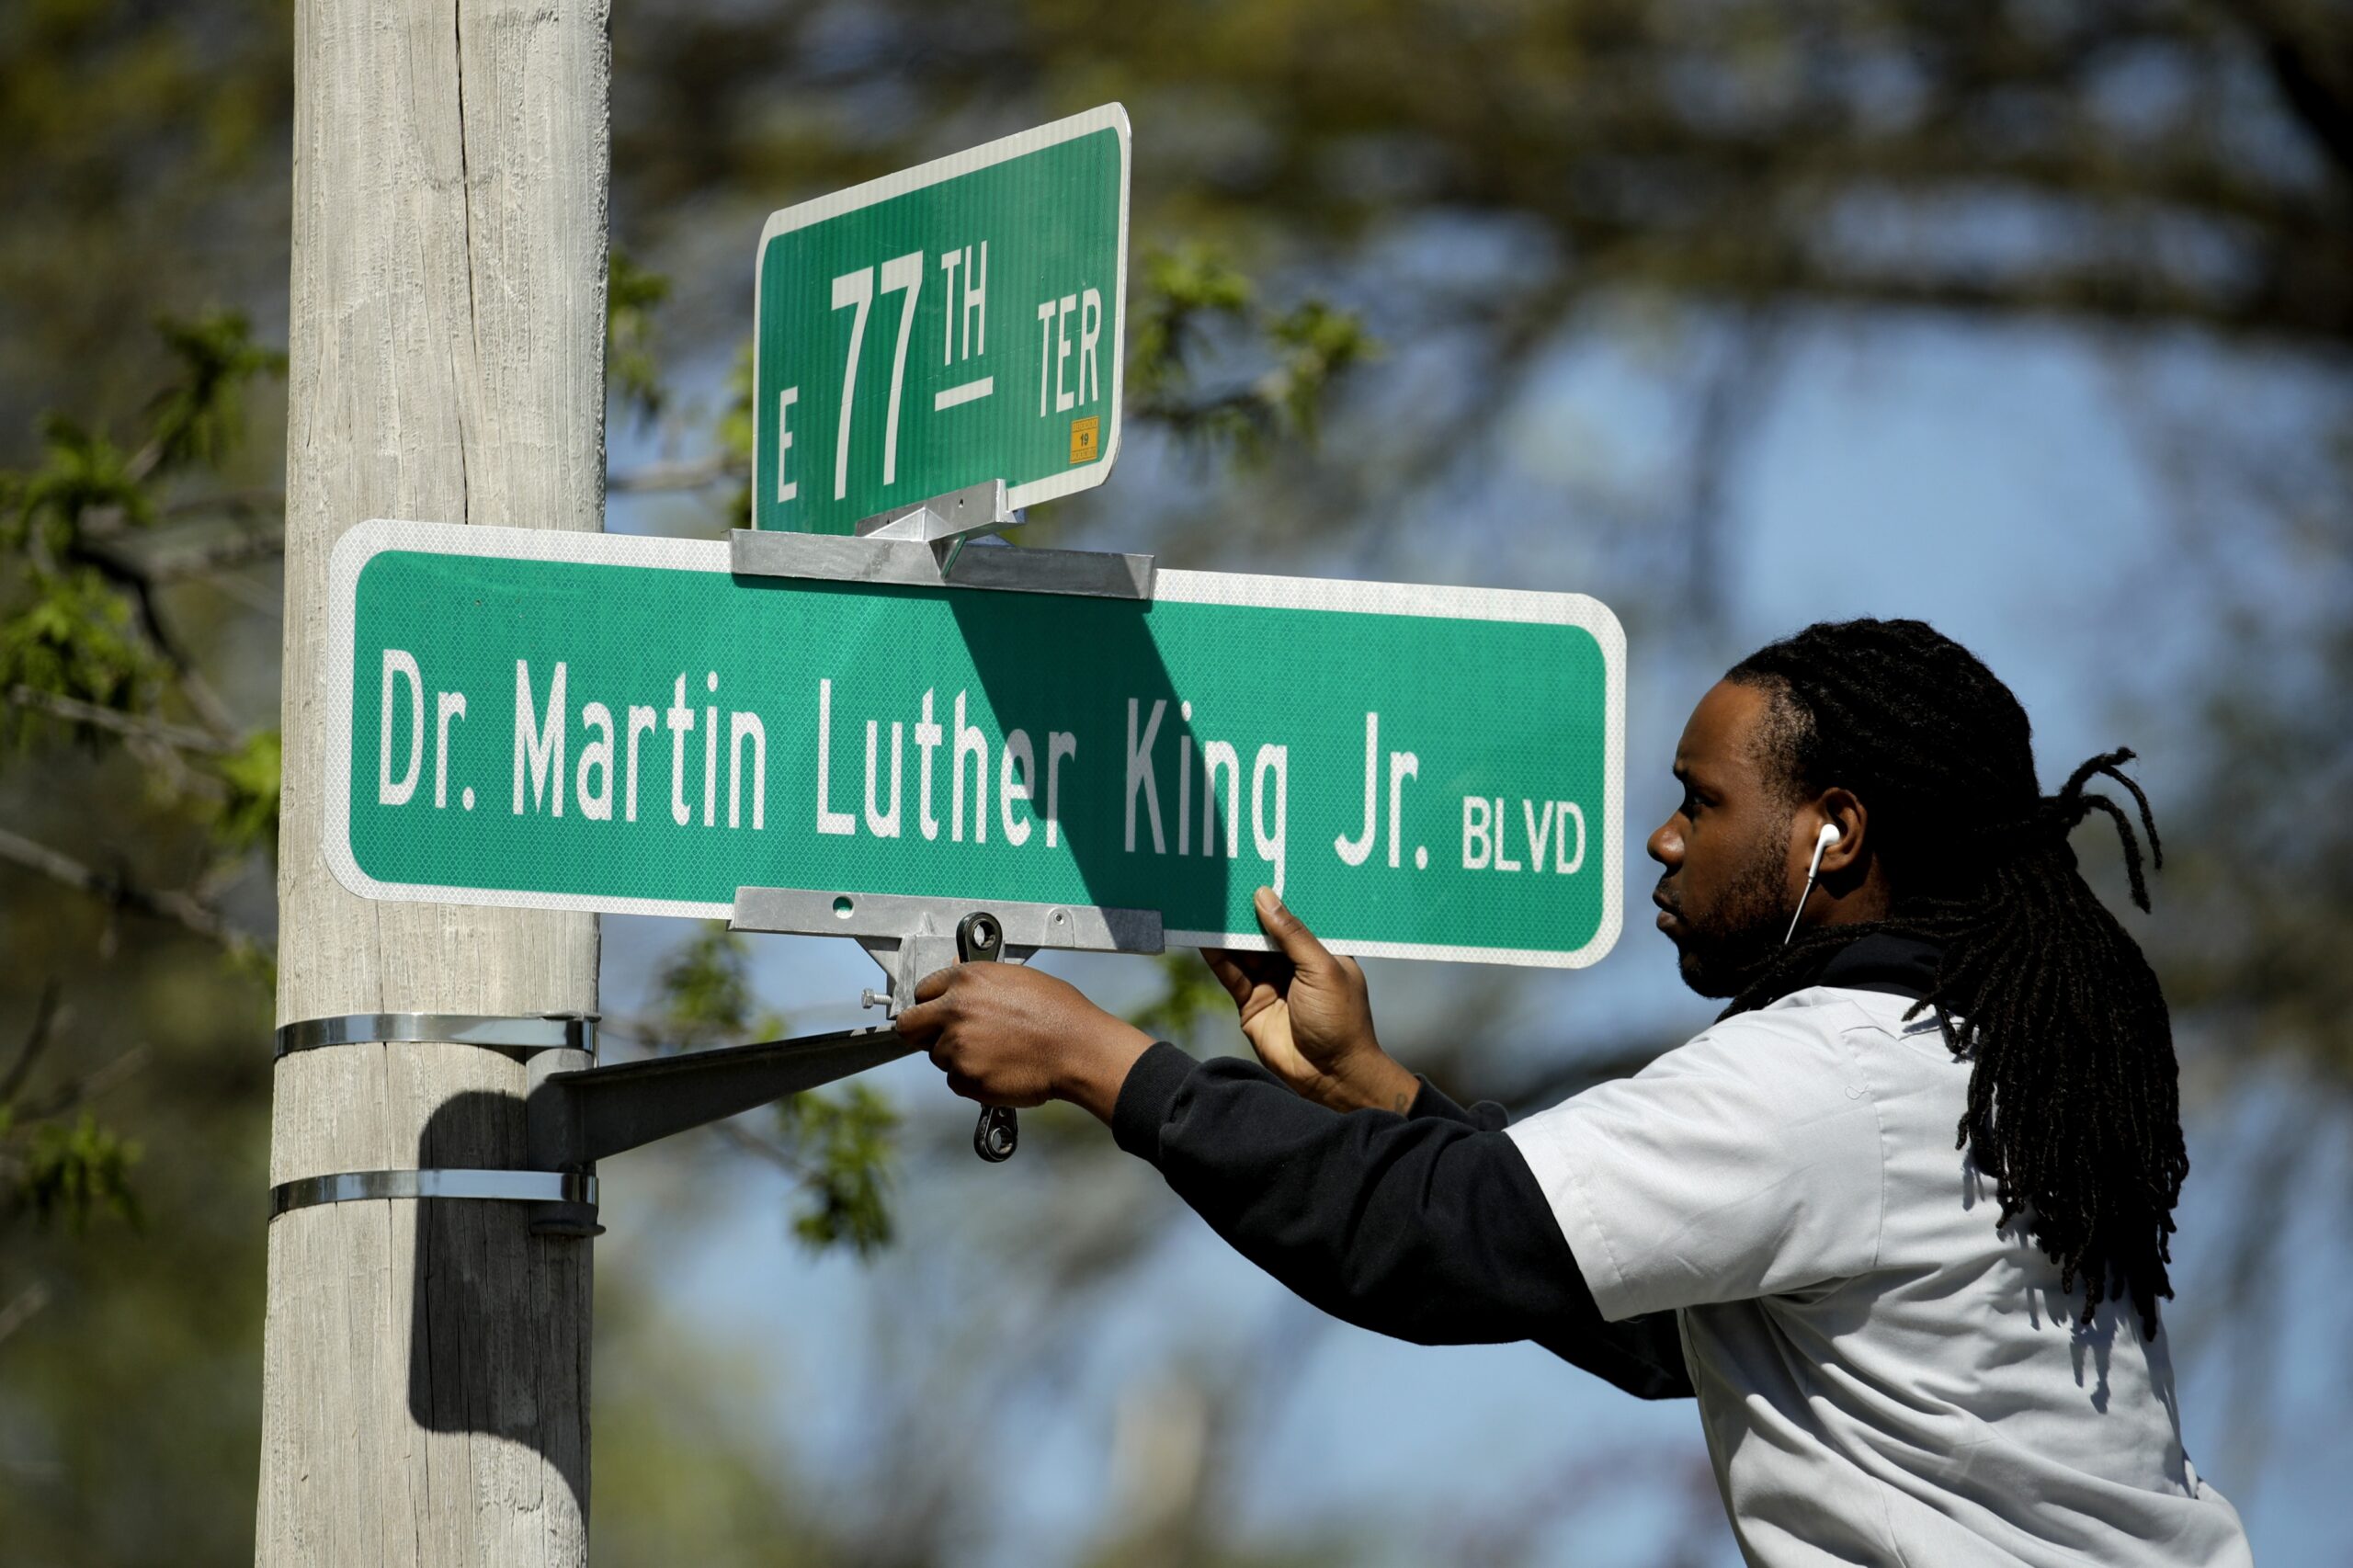 person changes a street sign to Dr. Martin Luther King, Jr. BLVD